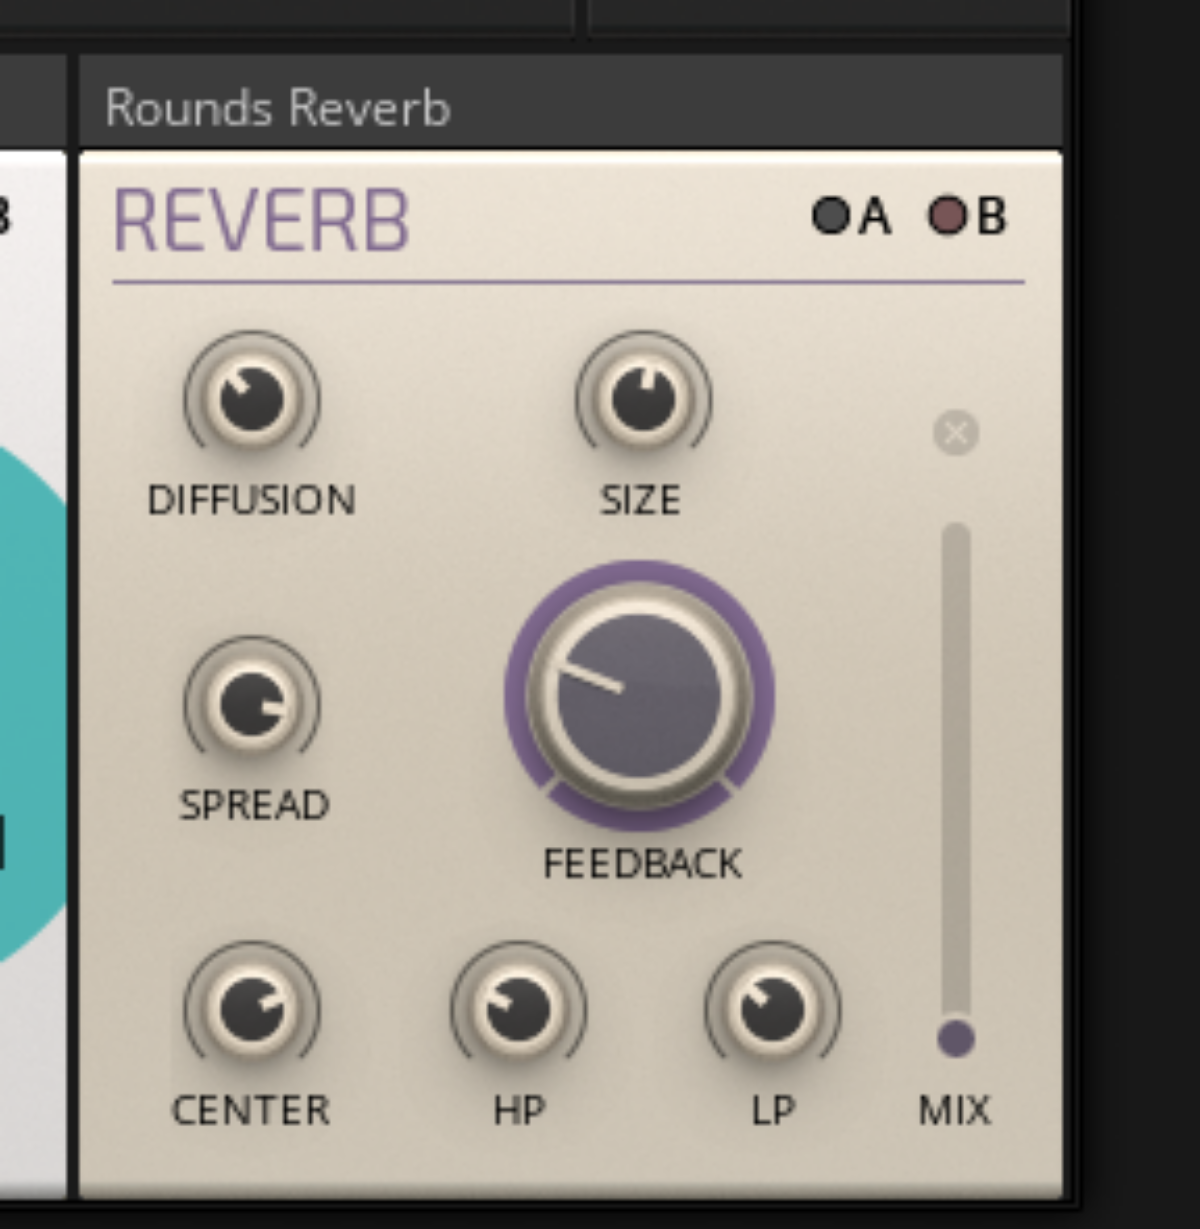 Turning down the built-in reverb